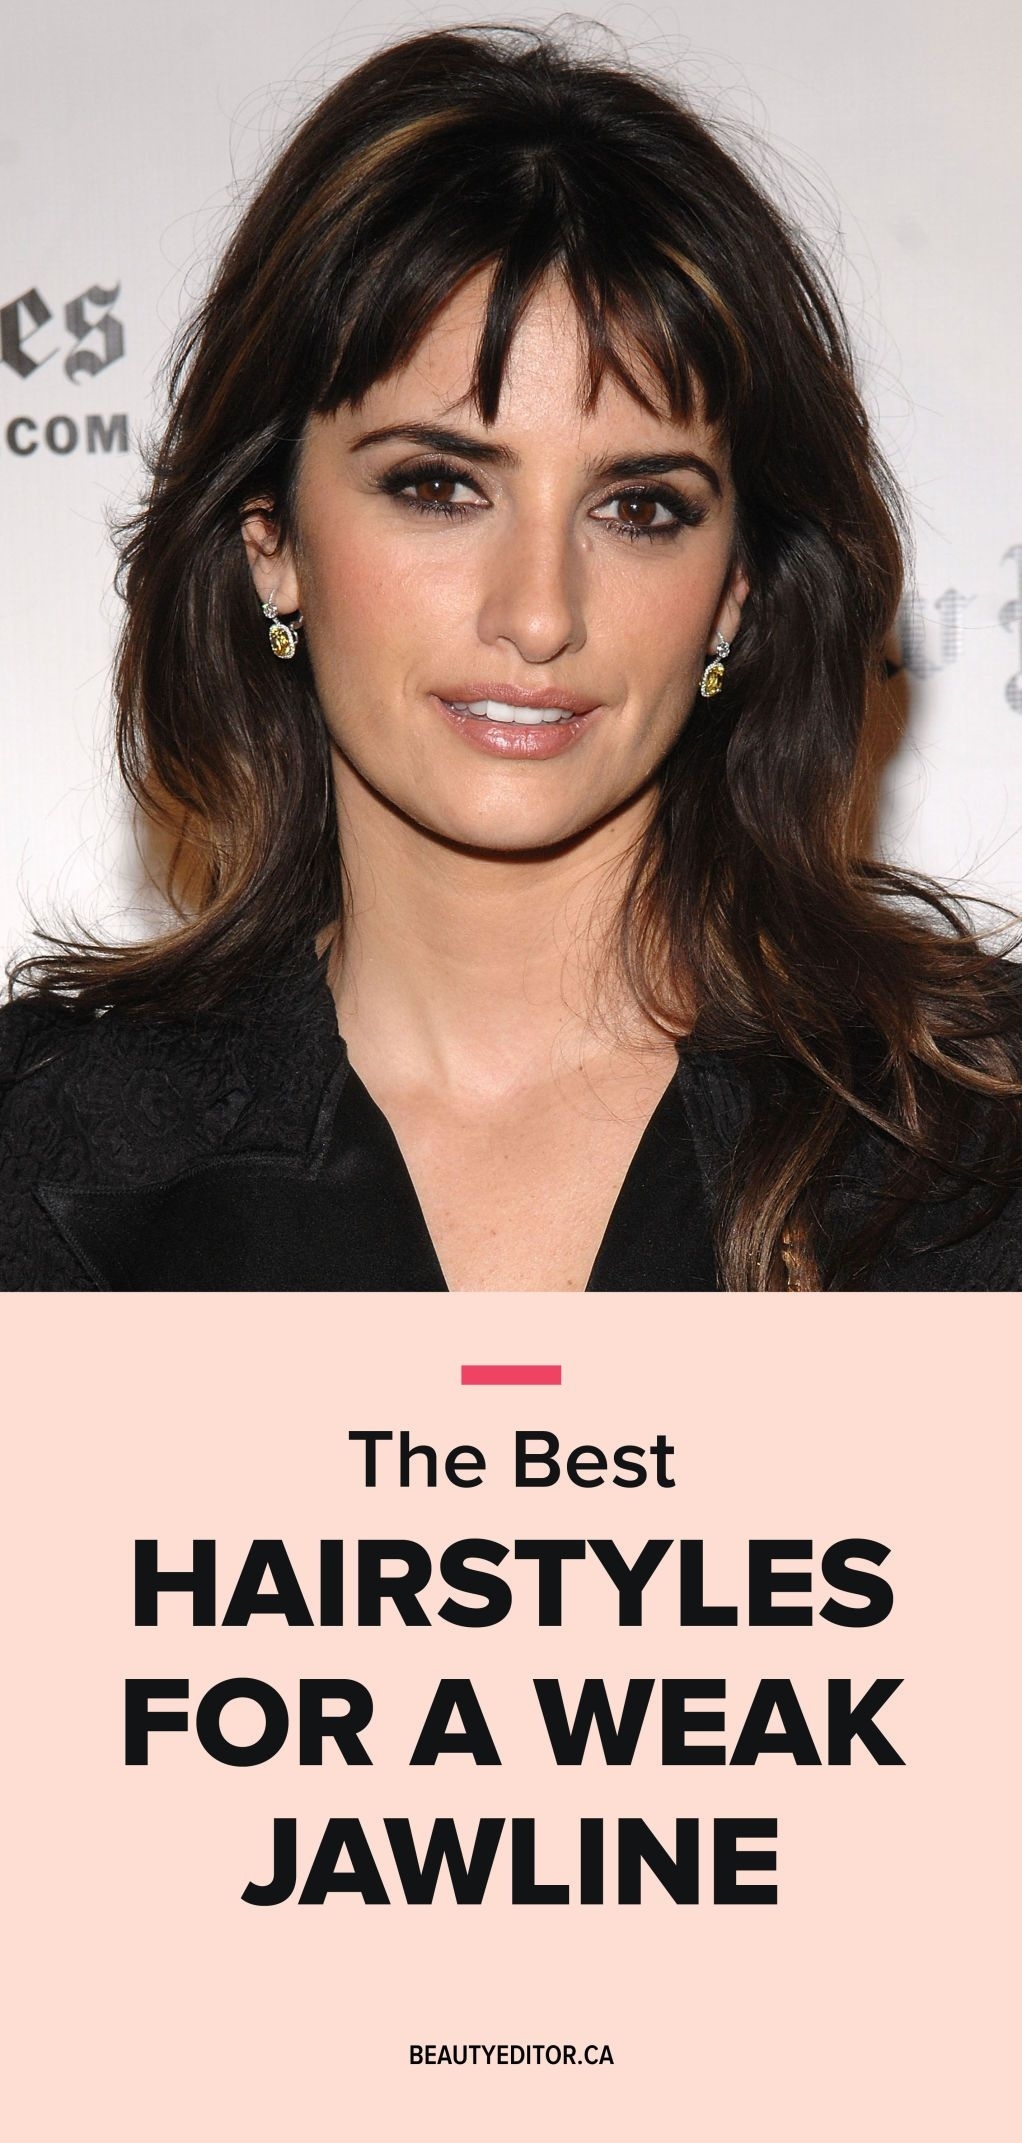 The Best Hairstyles For A Weak Jawline | Hair, Beauty pertaining to What Haircut For Women With Weak Chin